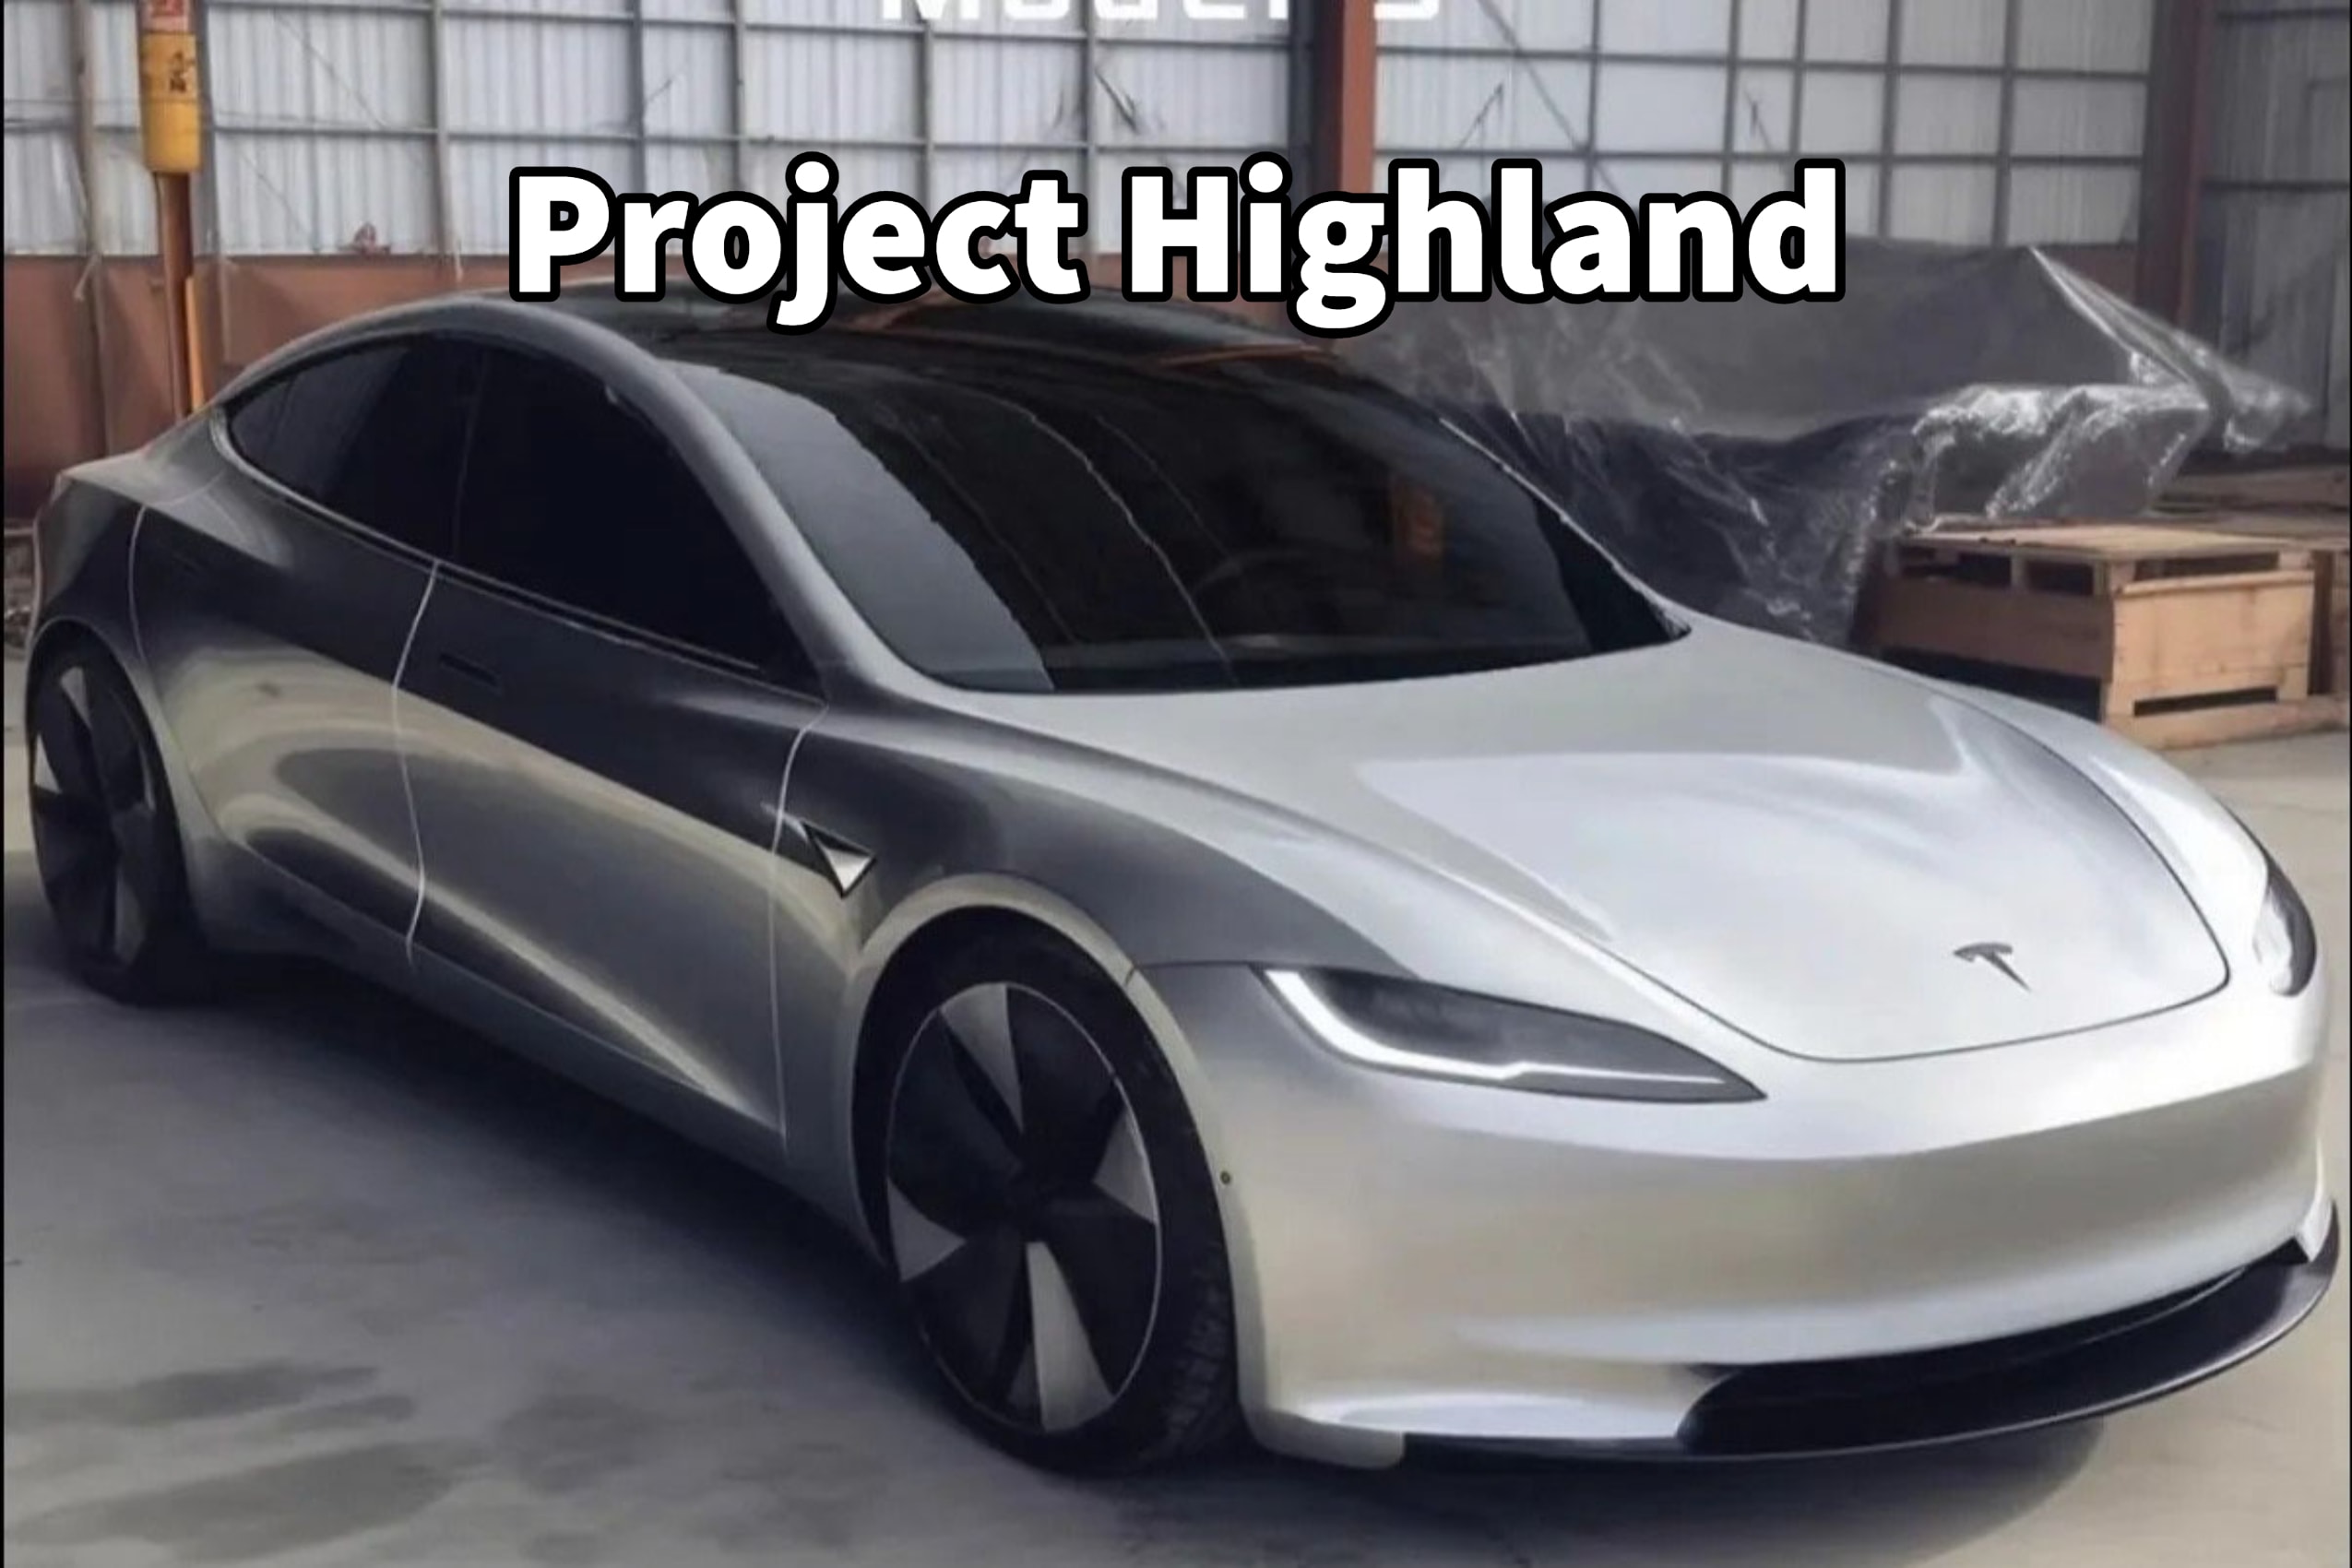 Model 3 'Project Highland' Marks an Important Change in Tesla's